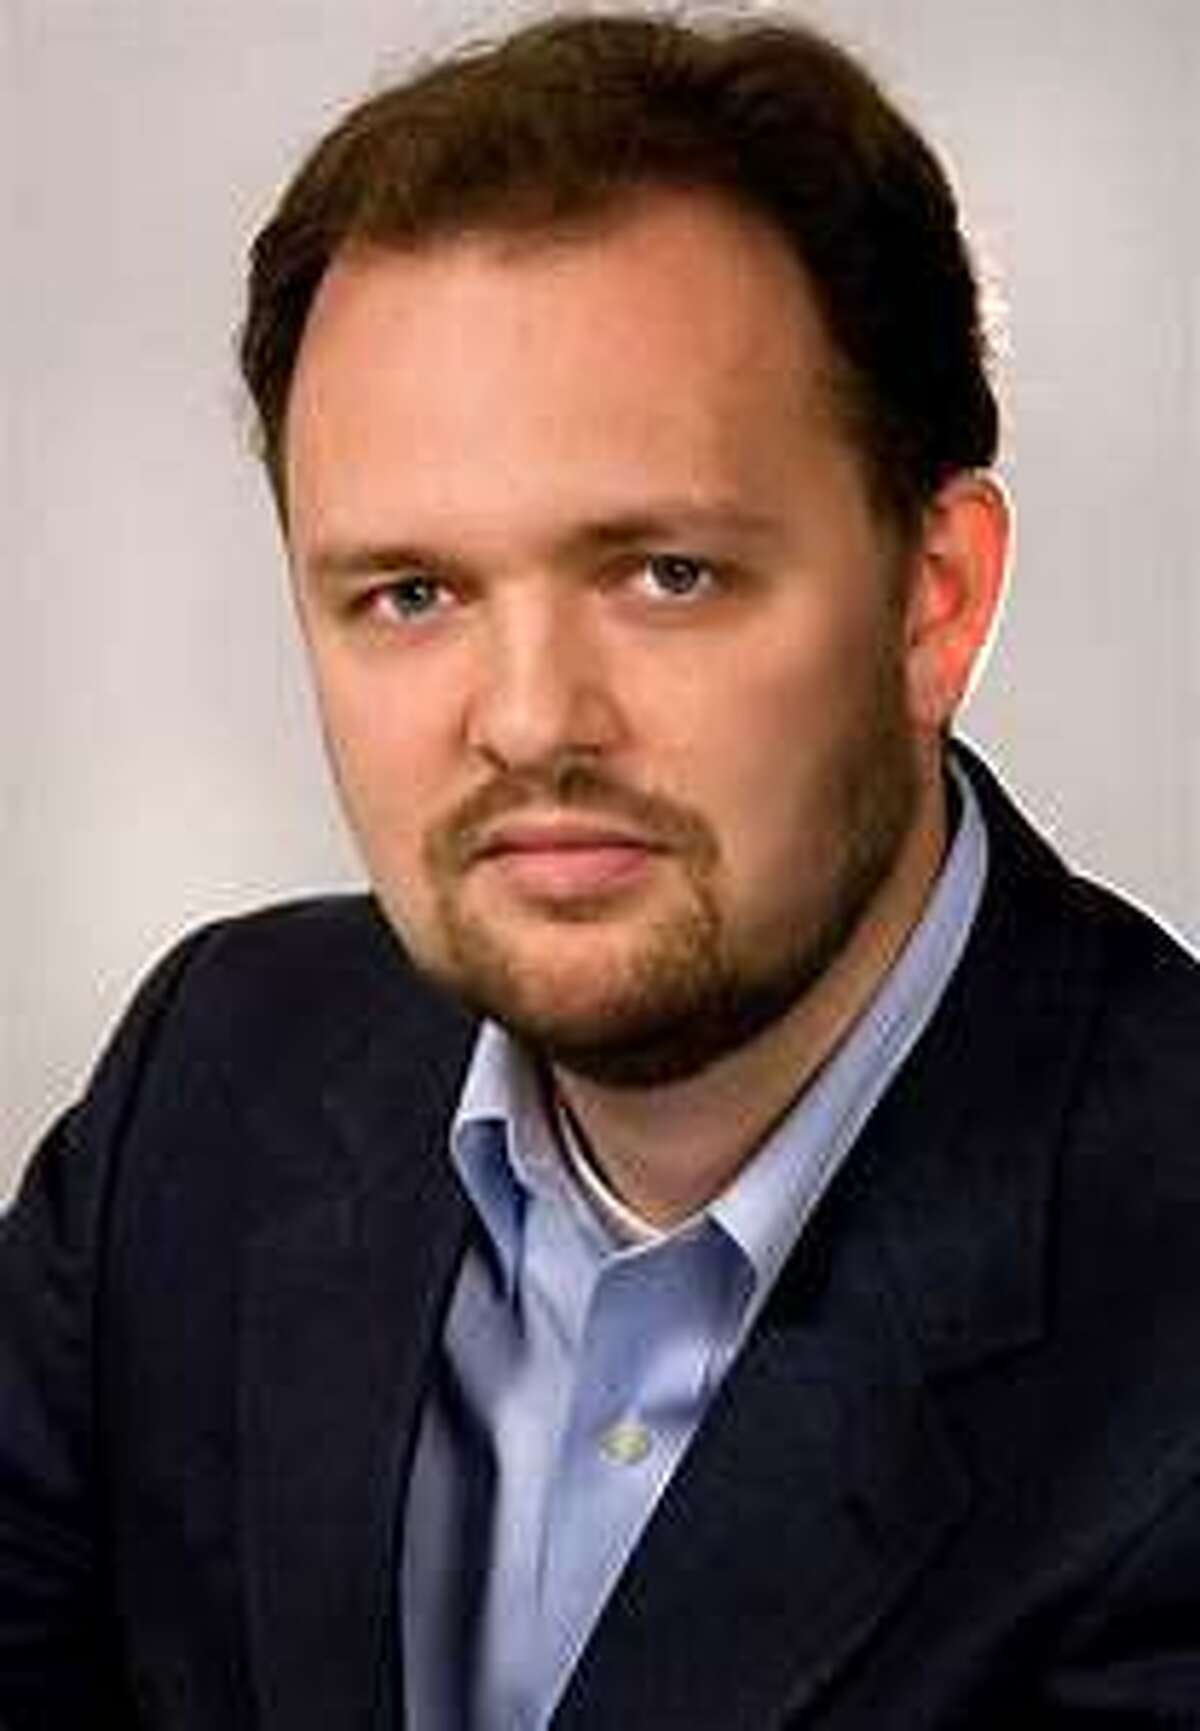 Ross douthat NYT ross douthat 2